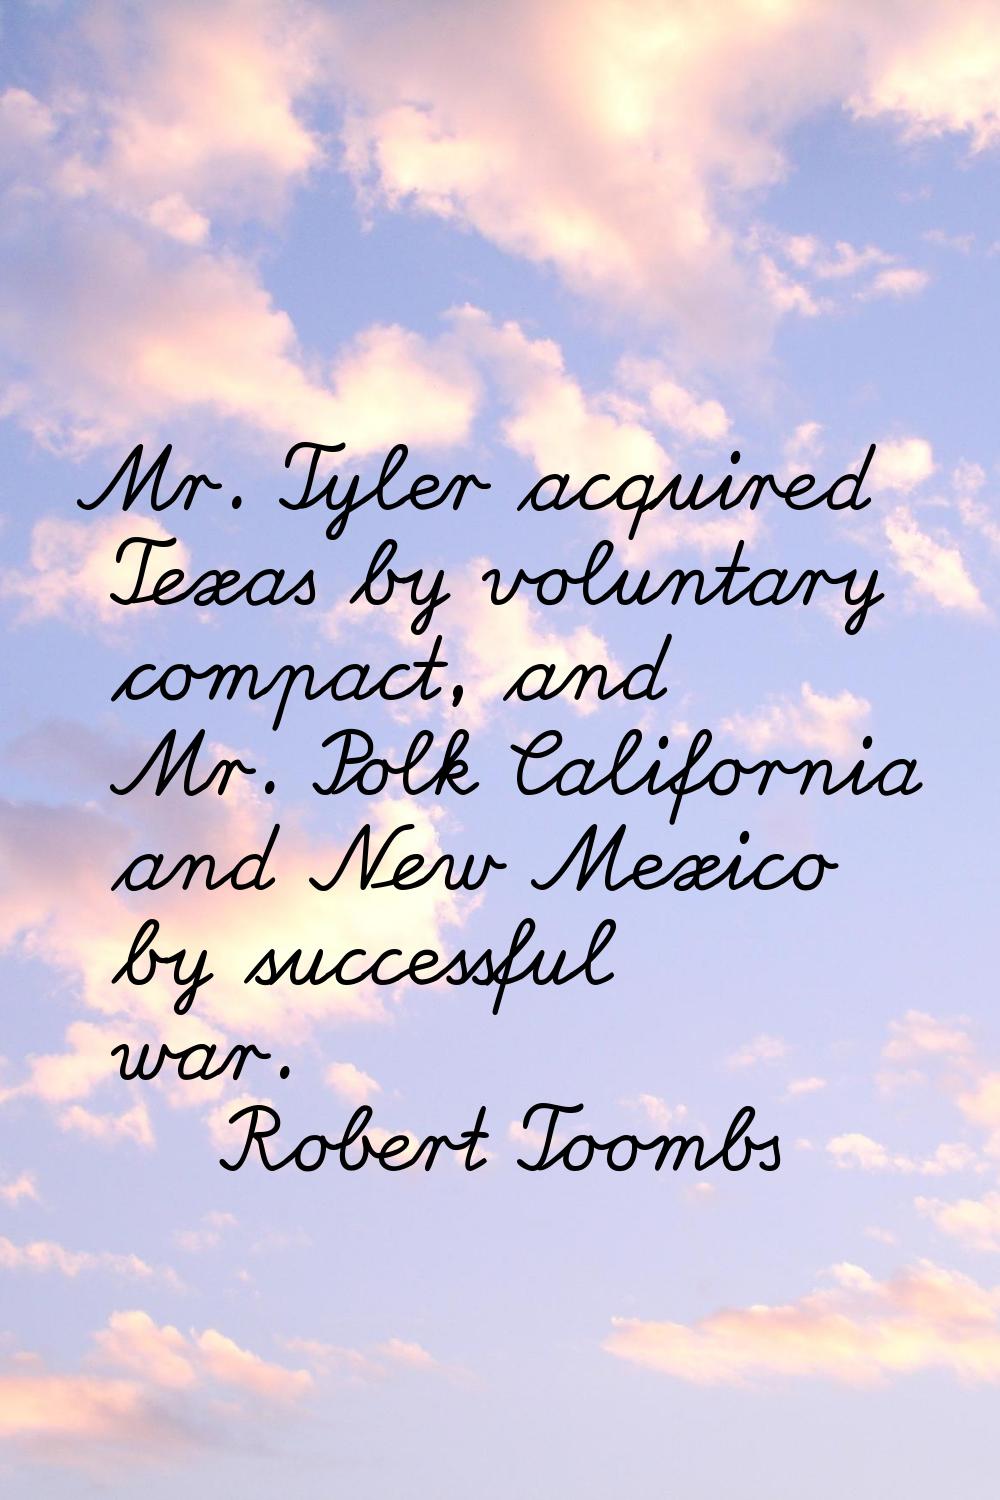 Mr. Tyler acquired Texas by voluntary compact, and Mr. Polk California and New Mexico by successful